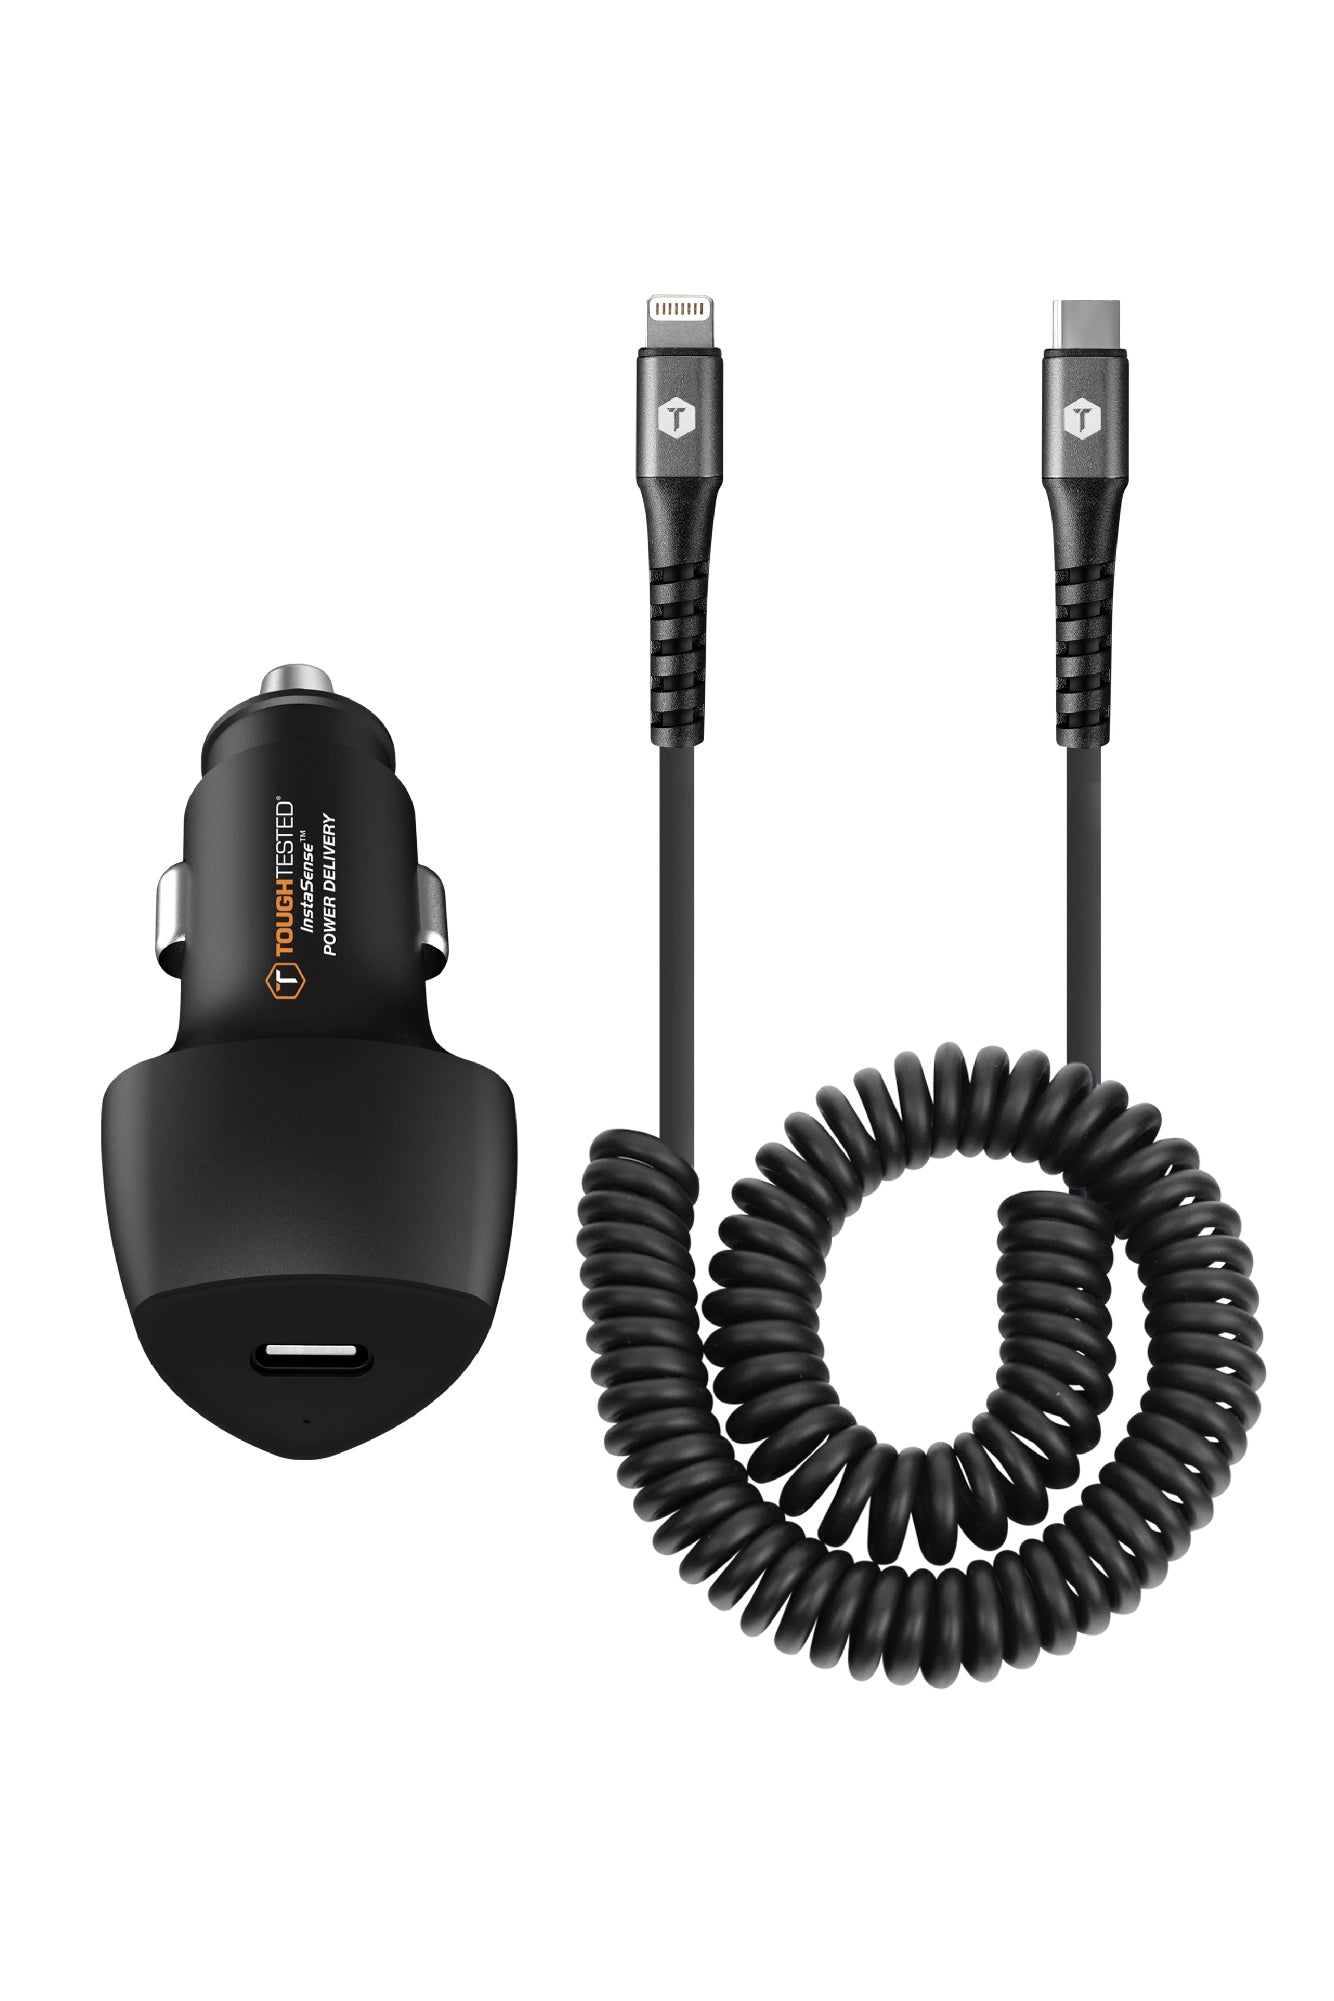 PD High Speed Car Charger Kit For Apple with 20W USB-C Port and 6ft Coiled USB-C to Lightning Cable